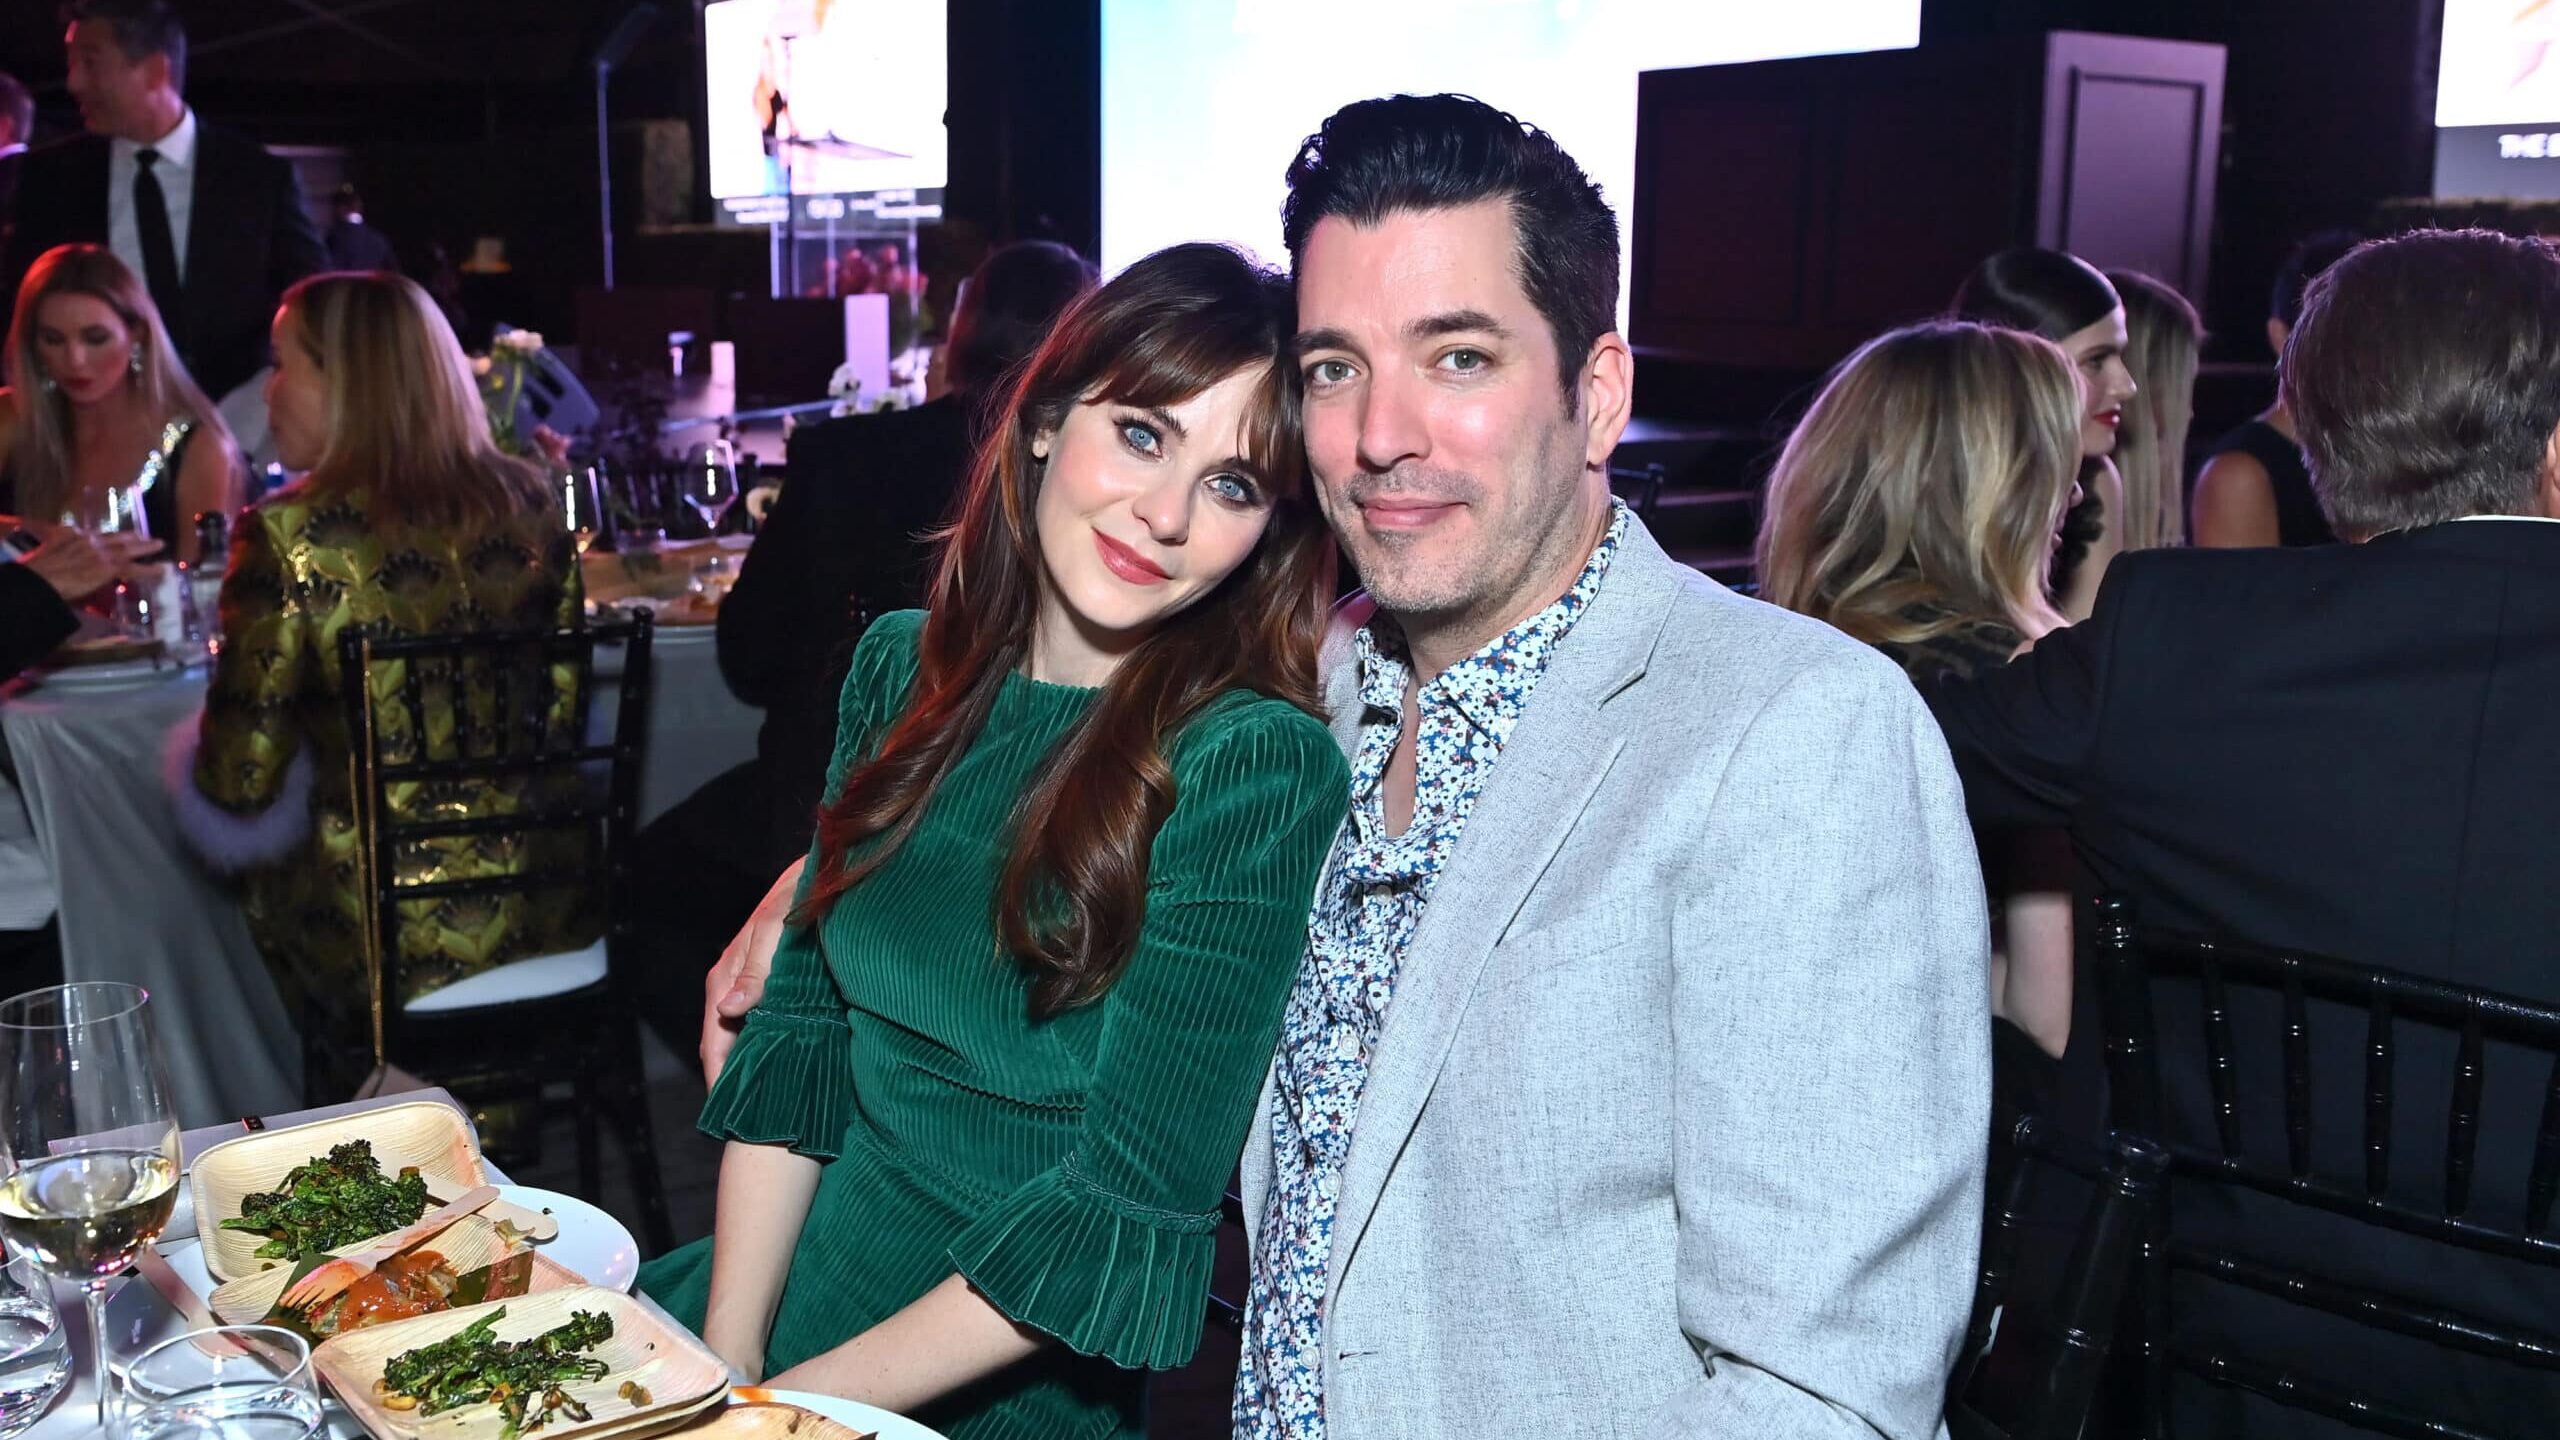 WEST HOLLYWOOD, CALIFORNIA - NOVEMBER 13: (L-R) Zooey Deschanel and Jonathan Silver Scott attend the Baby2Baby 10-Year Gala presented by Paul Mitchell on November 13, 2021 in West Hollywood, California.